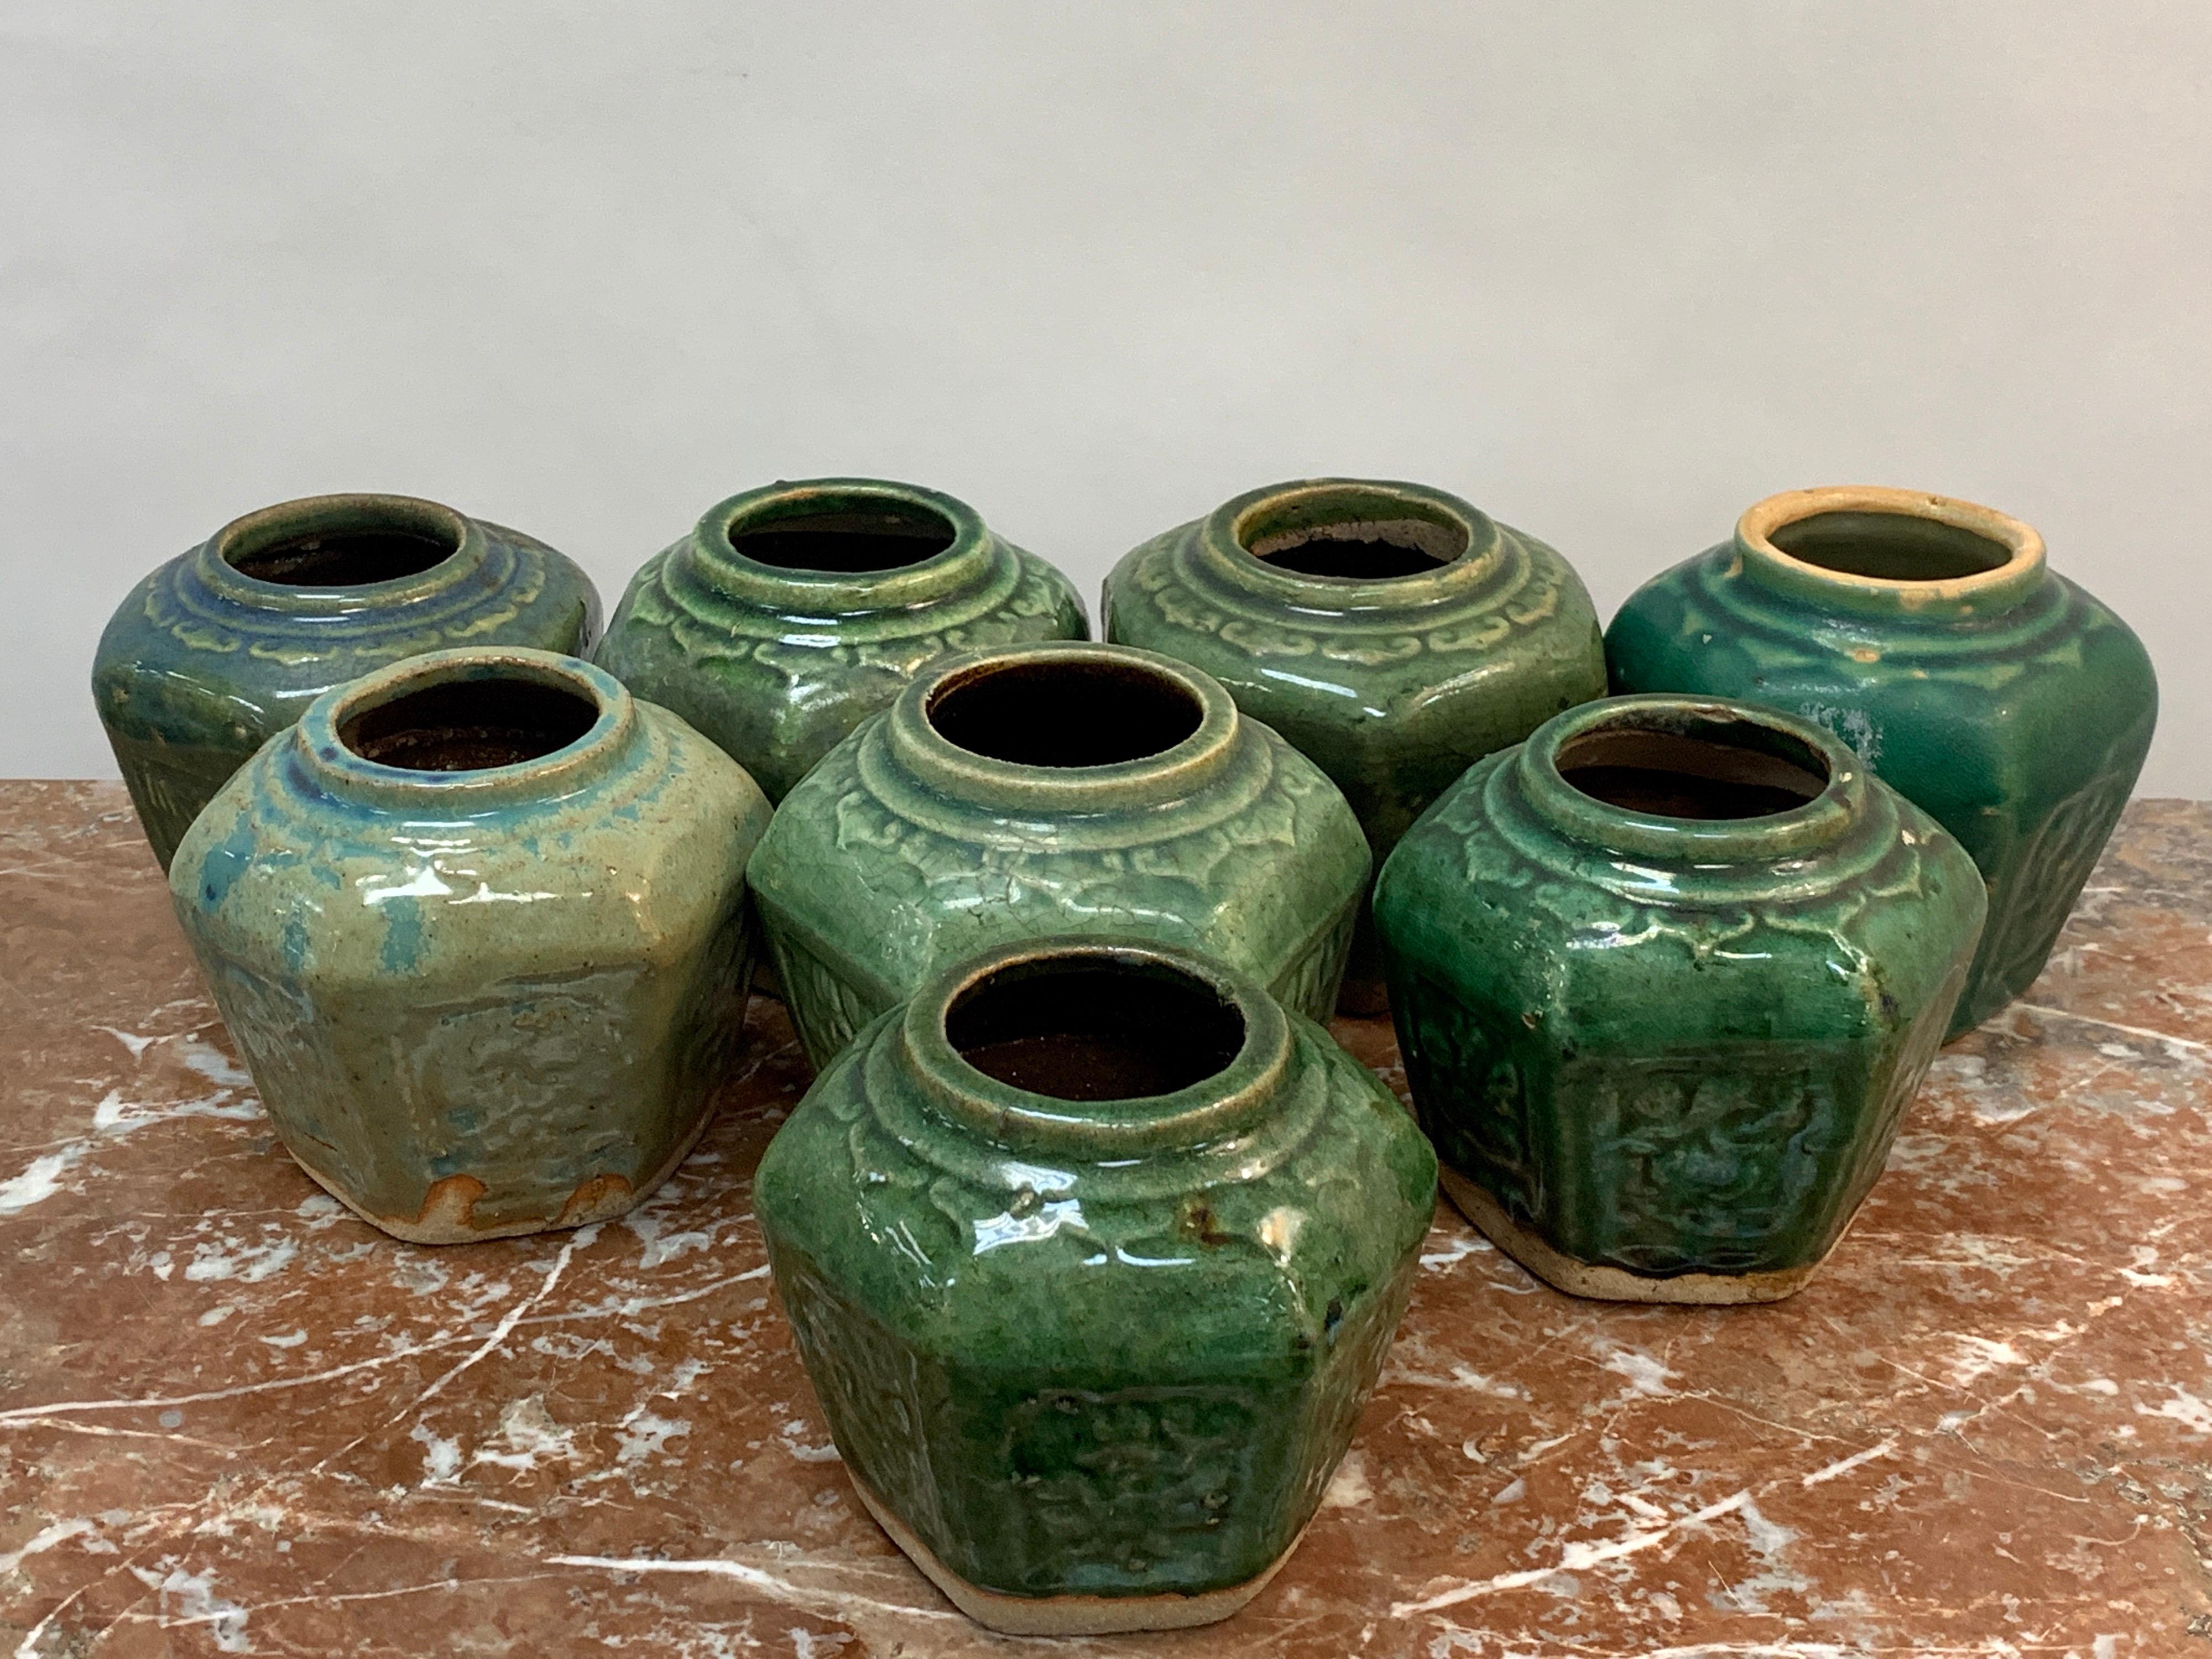 Collection of Eight Chinese export hexagonal vases in shades of green
Each one with incised decoration with various hues of green glazes. Some bearing remnants of import tags.   
     
     